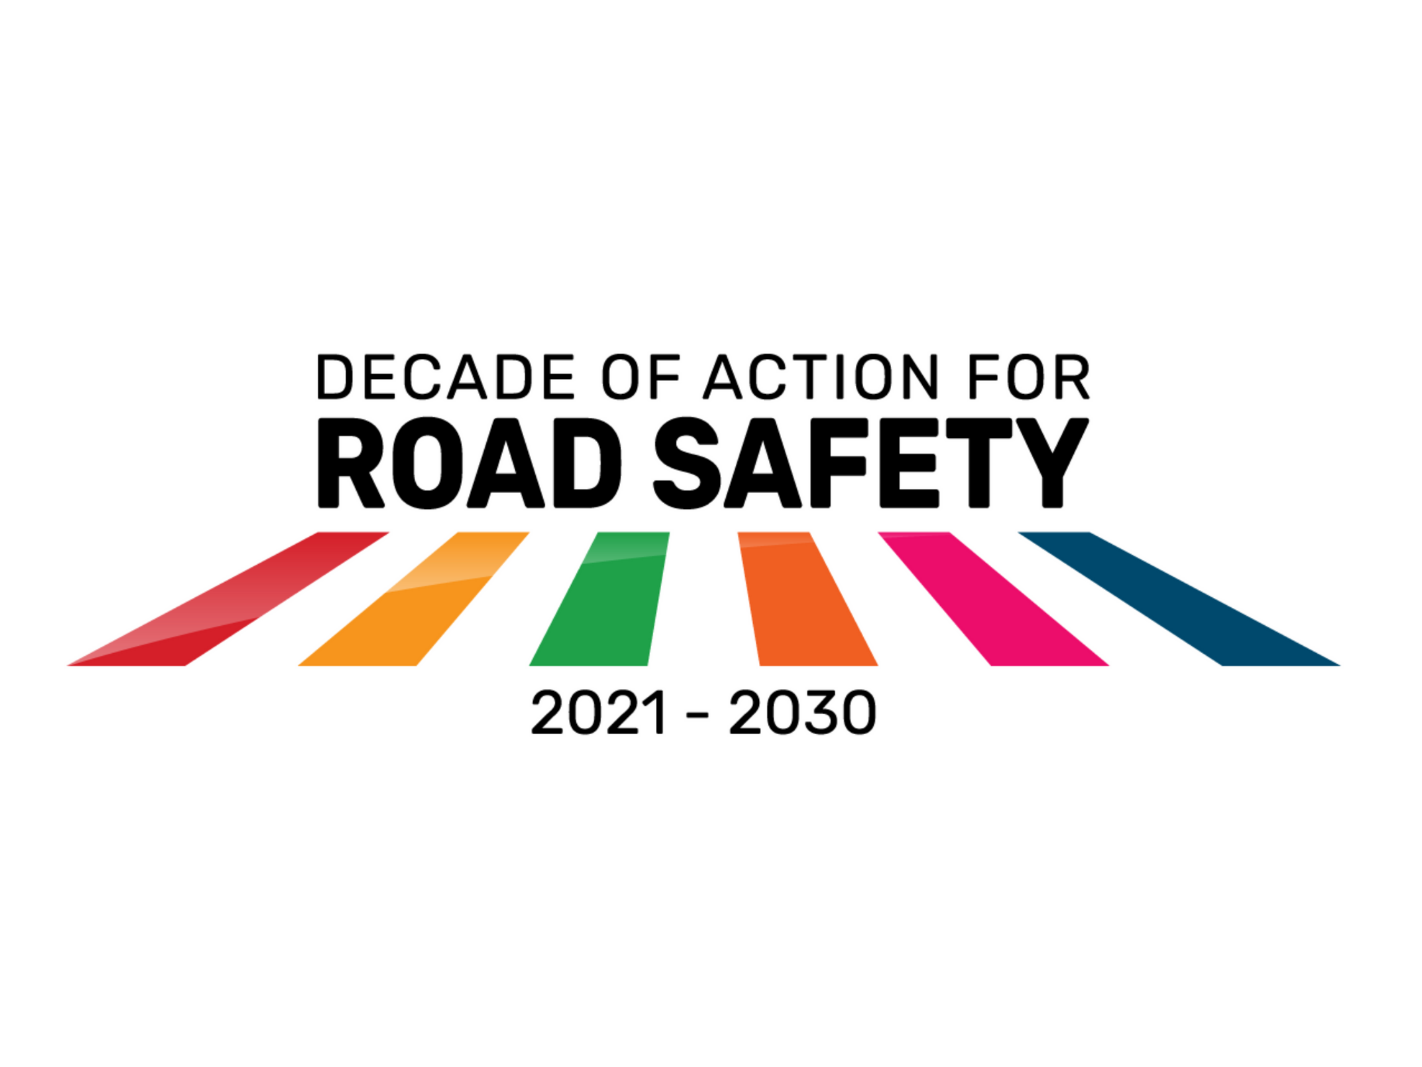 Decade of Action for Road Safety 2021-2030